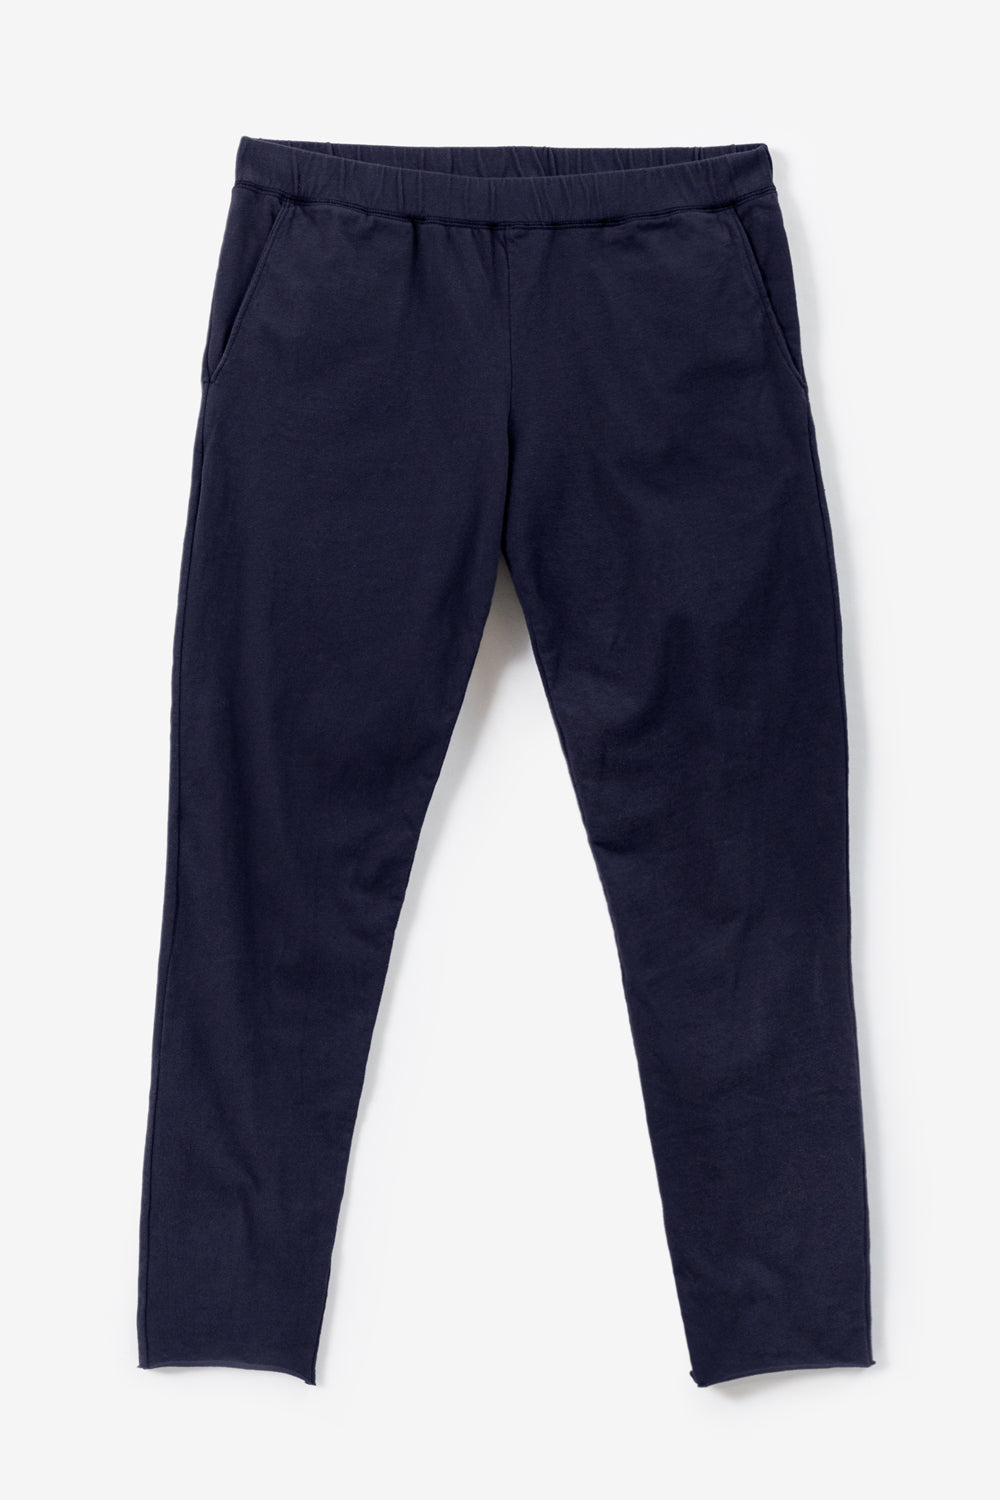 The Jogger in Navy.